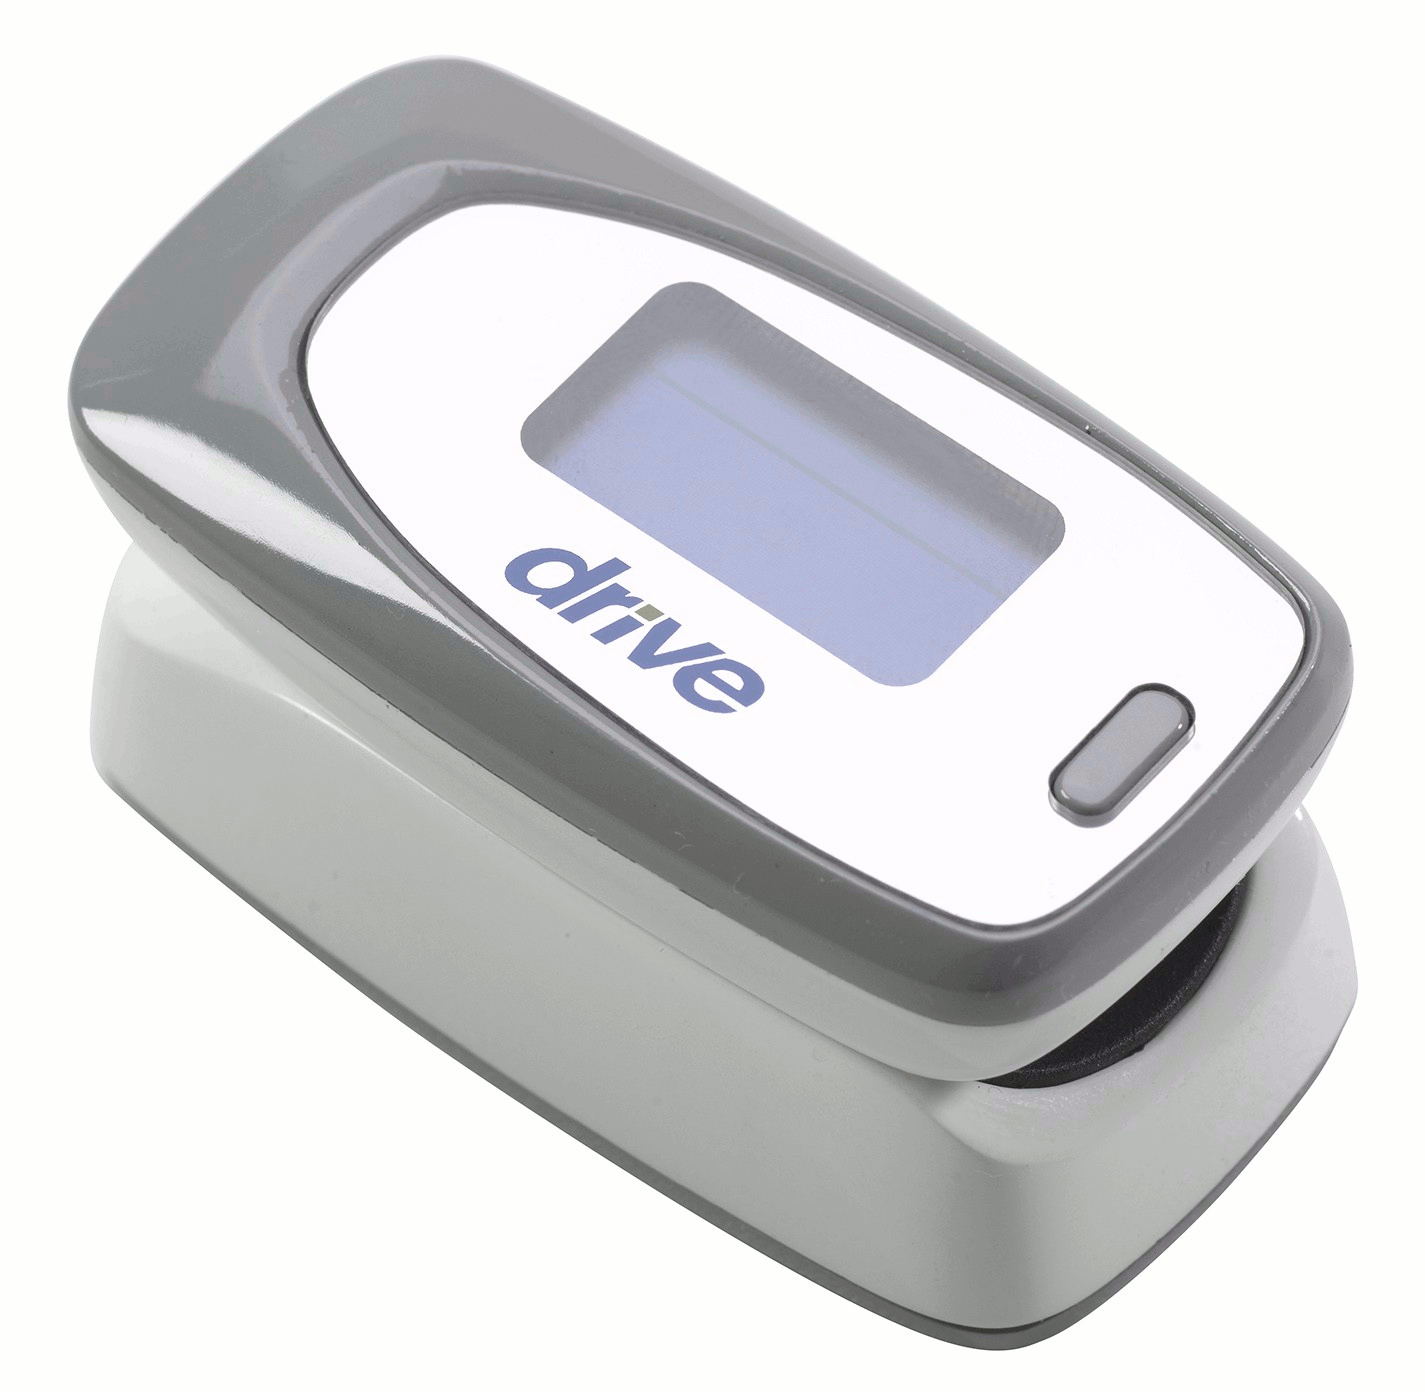 Pulse Oximeters Products, Supplies and Equipment